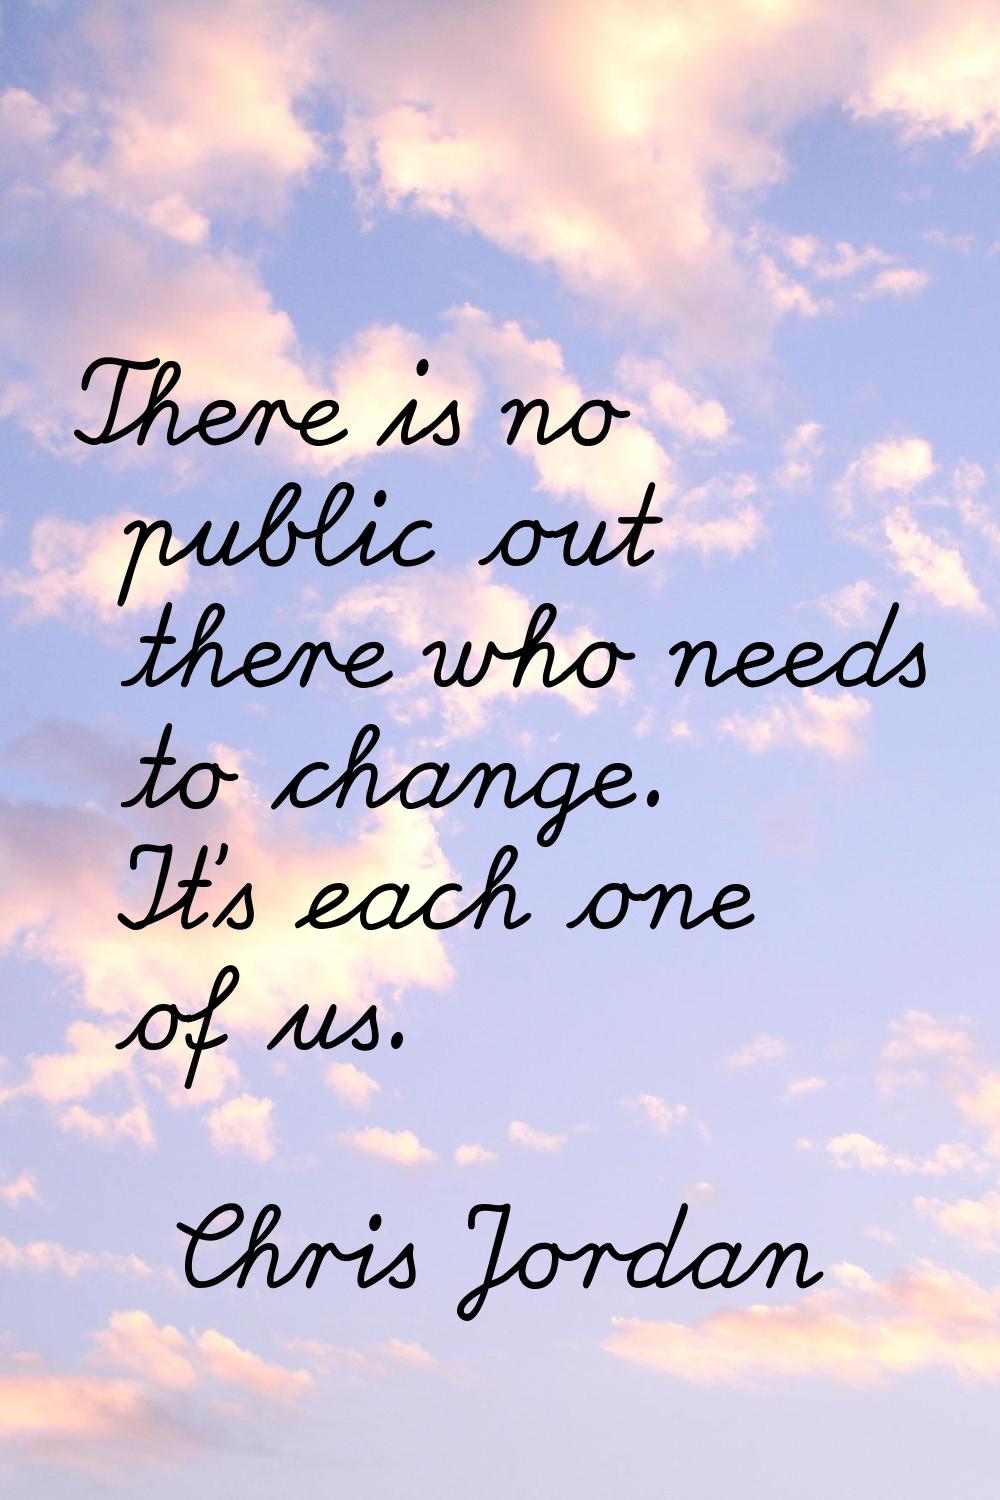 There is no public out there who needs to change. It's each one of us.